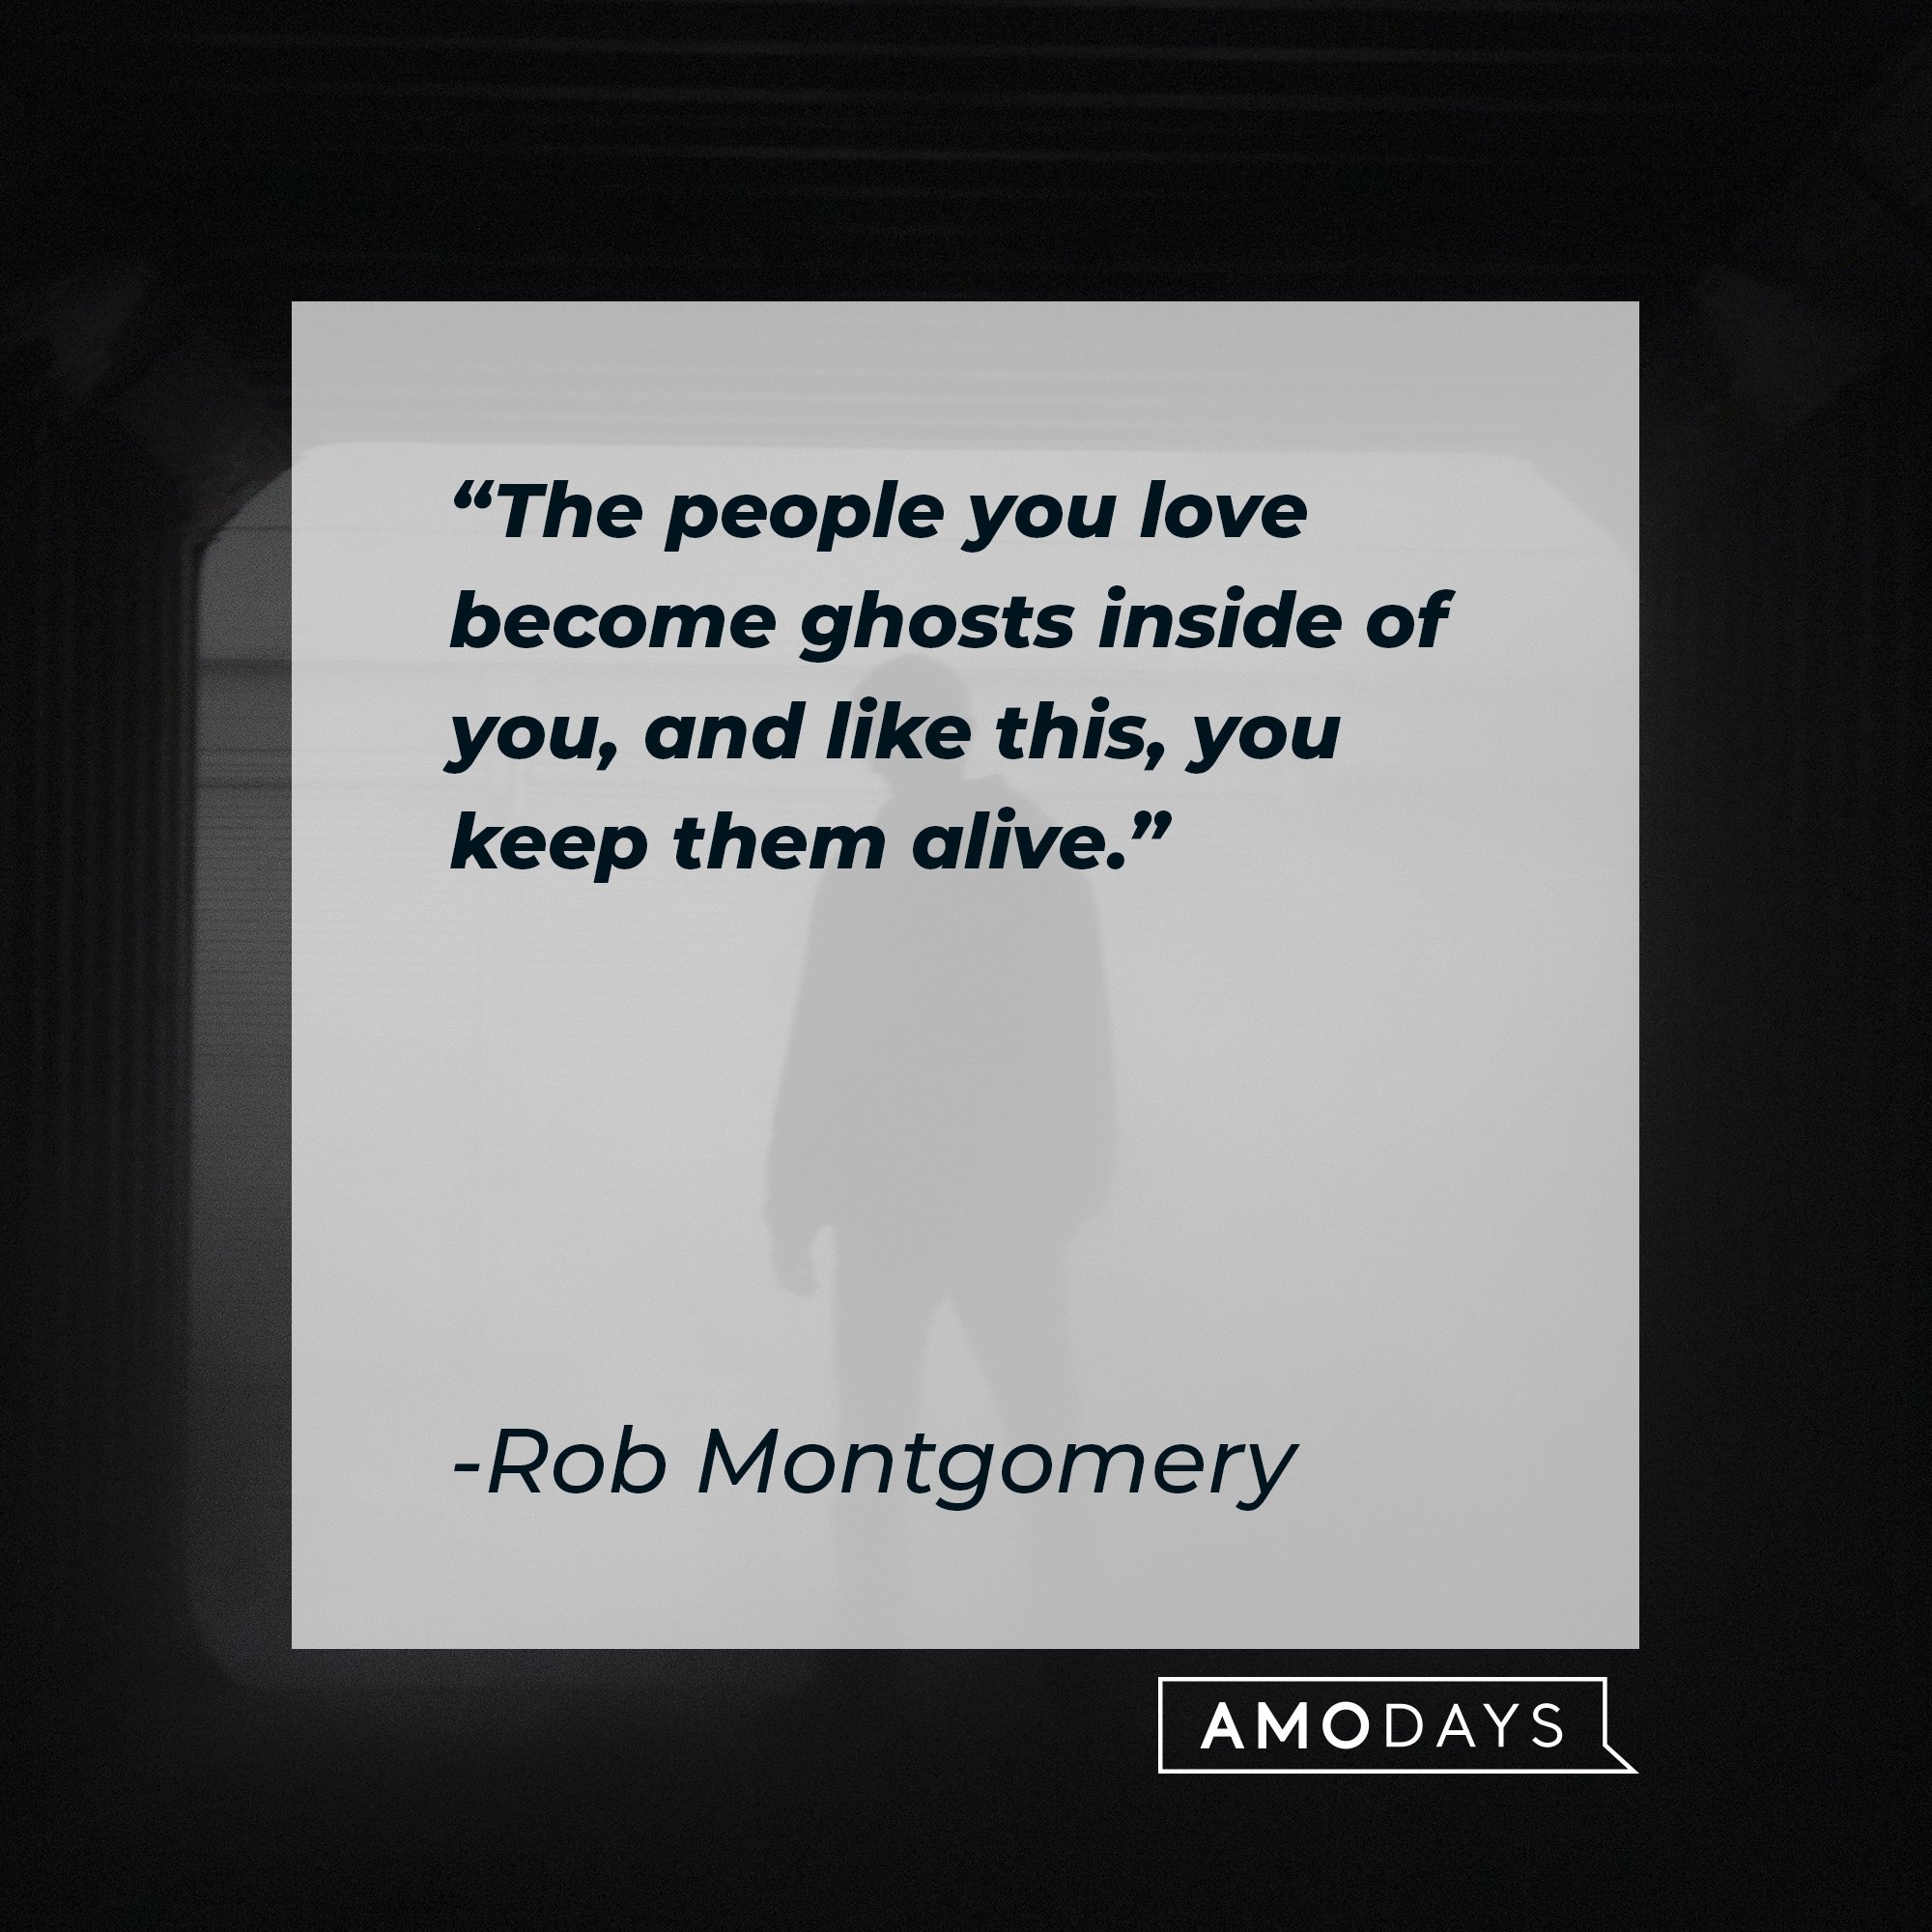 Rob Montgomery’s quote: "The people you love become ghosts inside of you, and like this, you keep them alive." | Image: AmoDays